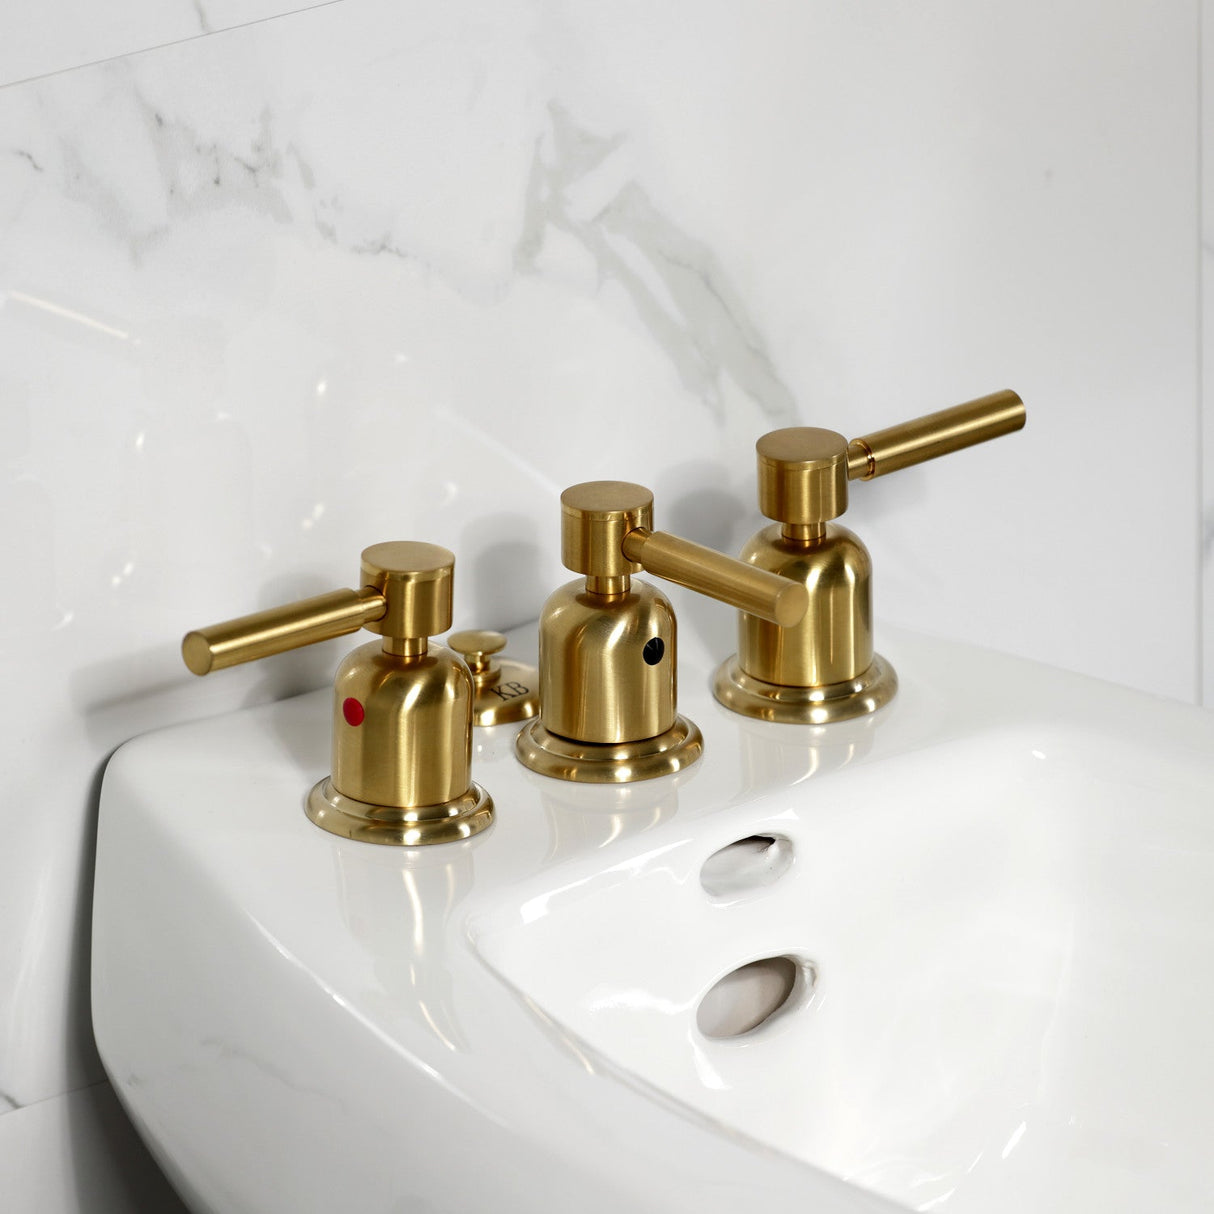 Concord KB6327DL Three-Handle Vertical Spray Bidet Faucet with Brass Pop-Up, Brushed Brass